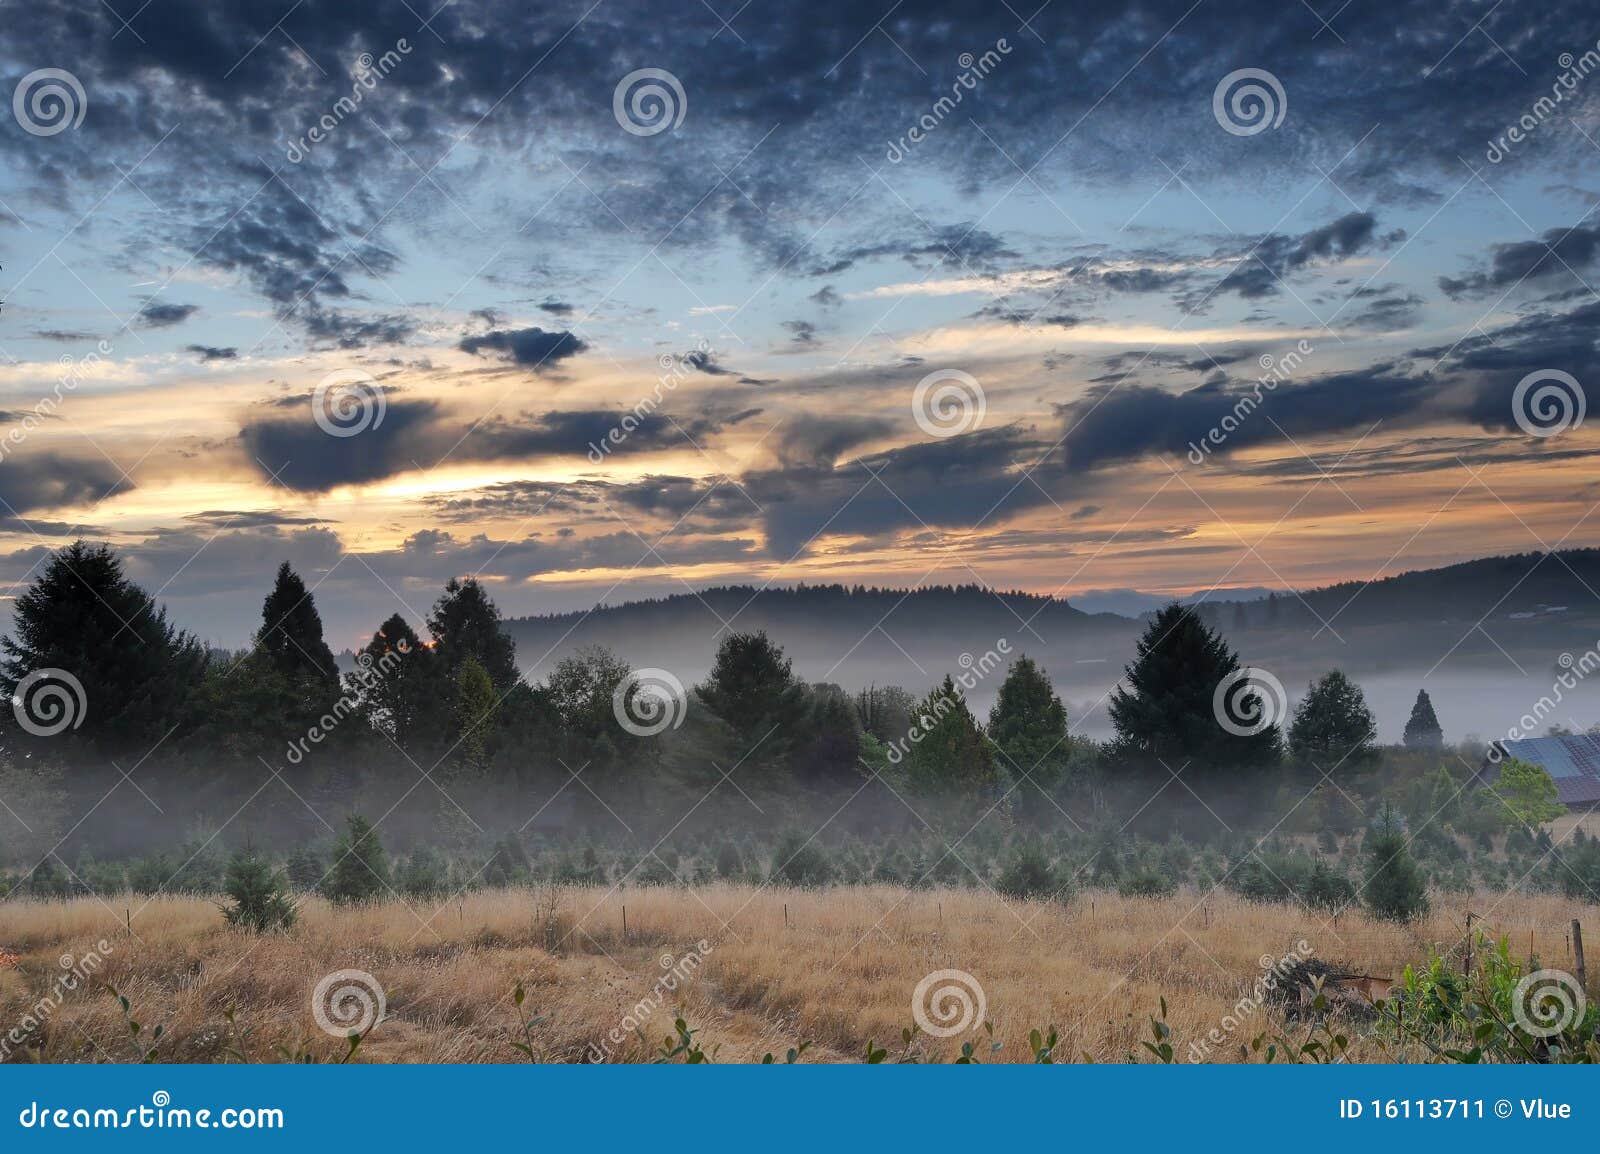 Beautiful Morning Landscape with Fog and a sunrise. HDR. Dramatic 